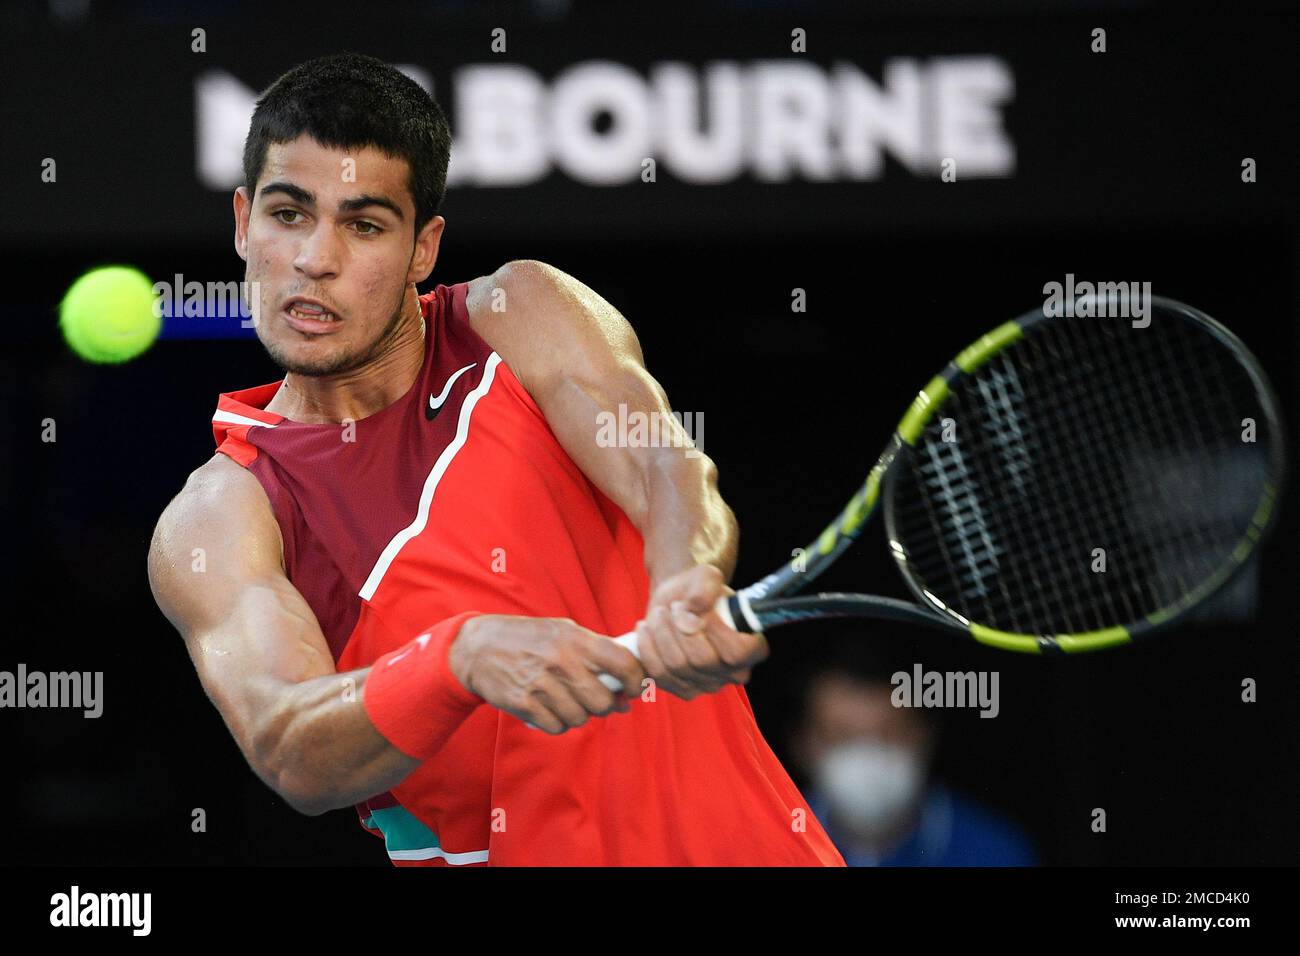 Carlos Alcaraz of Spain plays a backhand return to Matteo Berrettini of Italy during their third round match at the Australian Open tennis championships in Melbourne, Australia, Friday, Jan